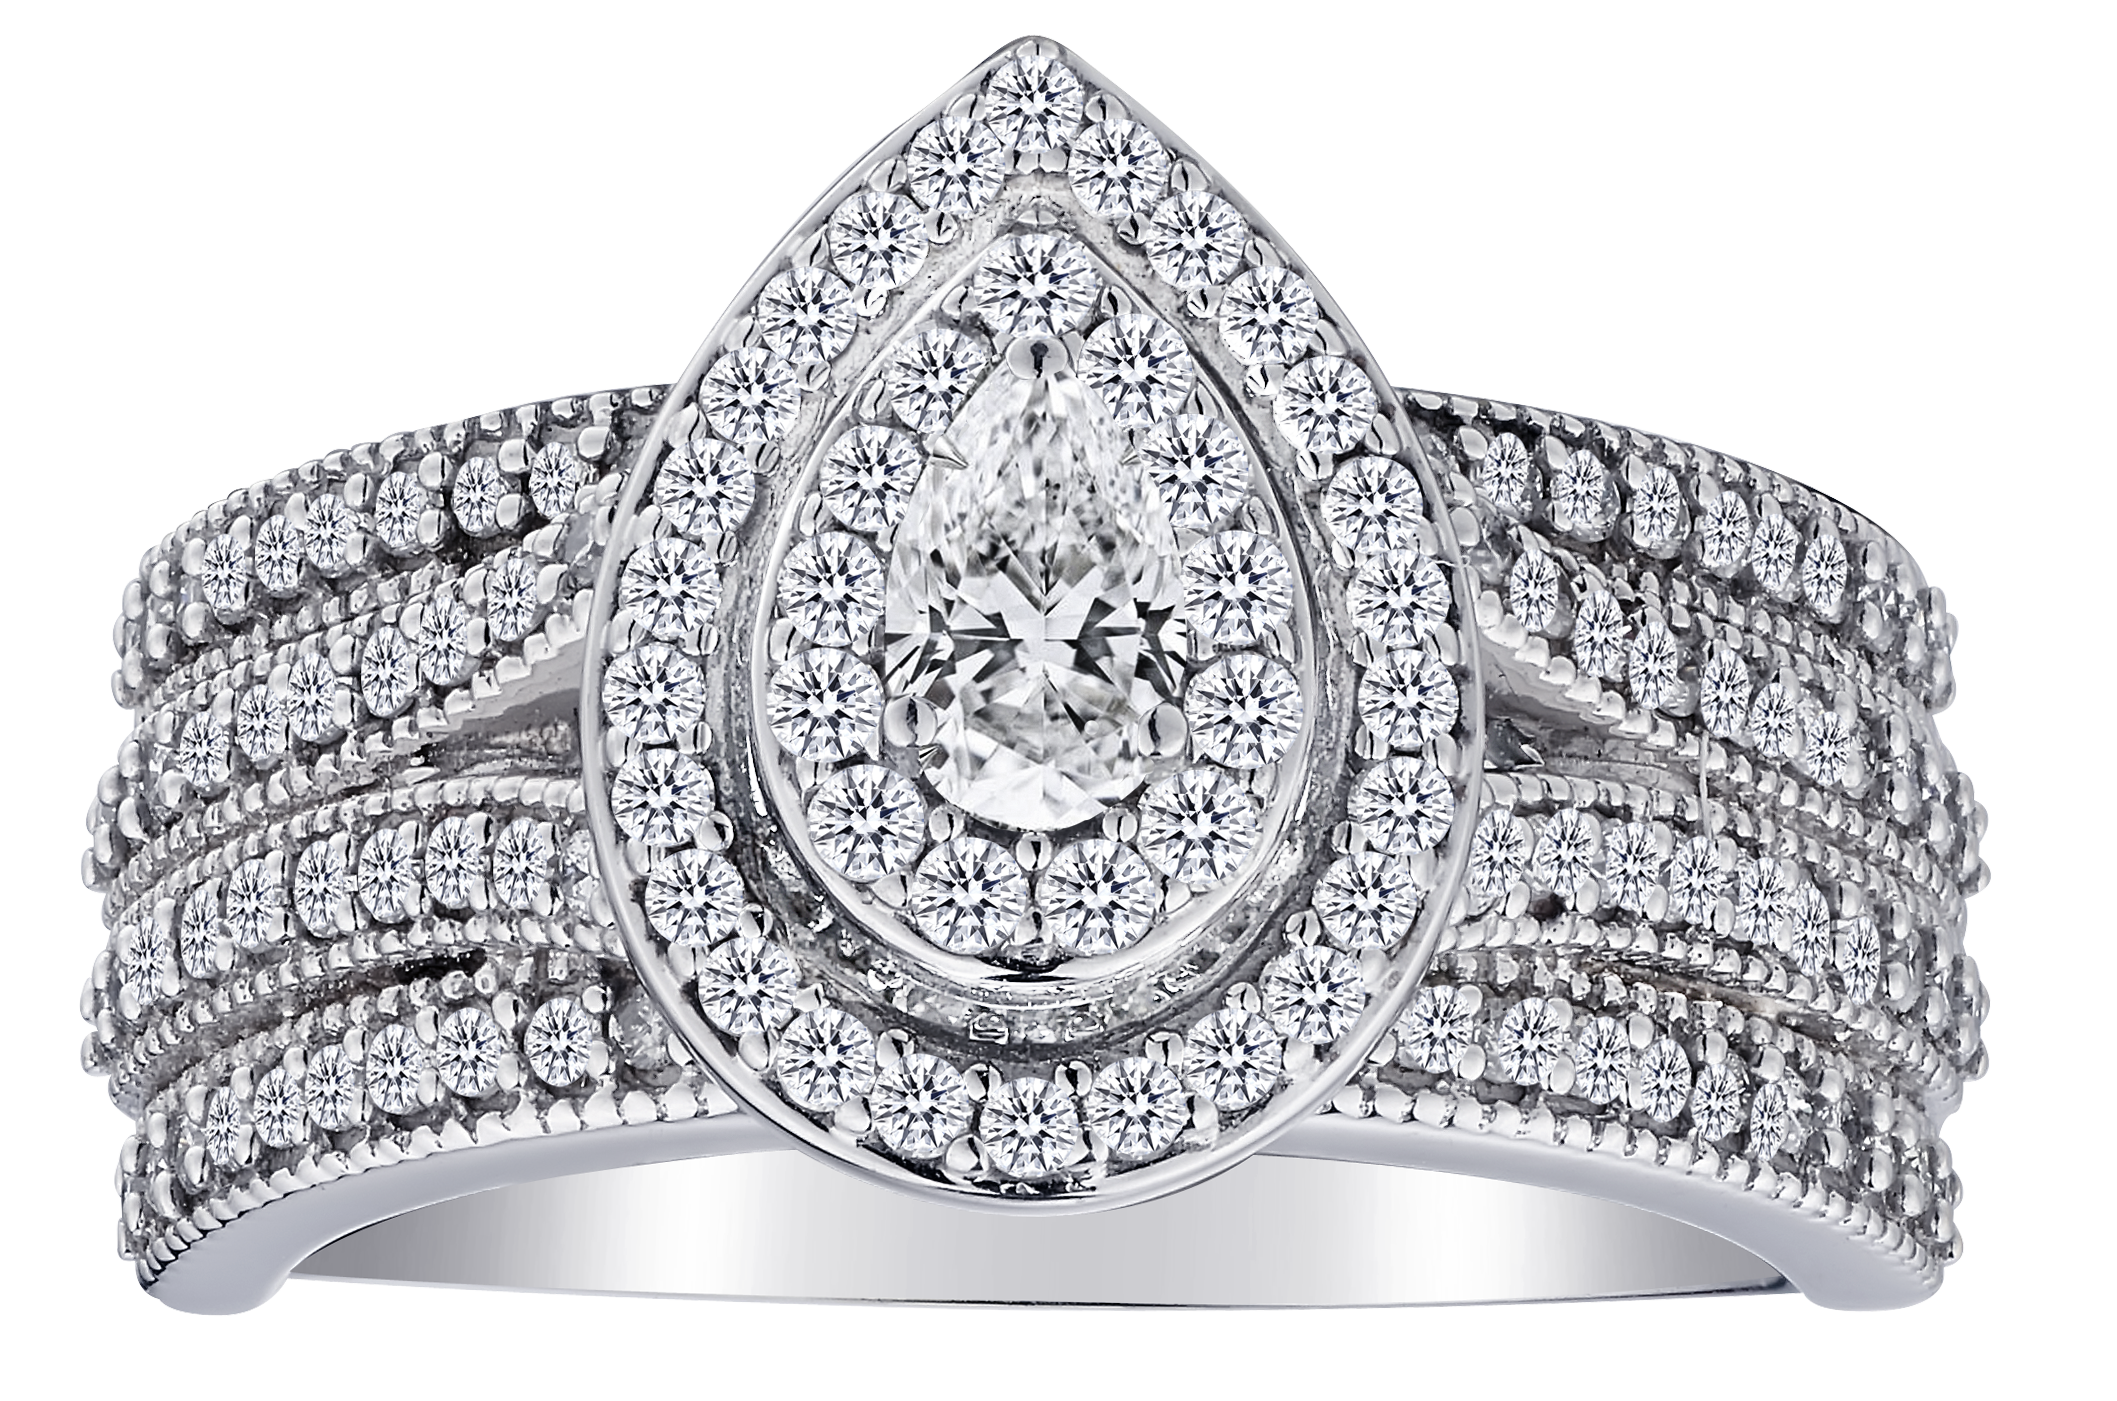 1.05 Carats of Diamonds Double Halo Ring, 10kt White Gold.....................NOW